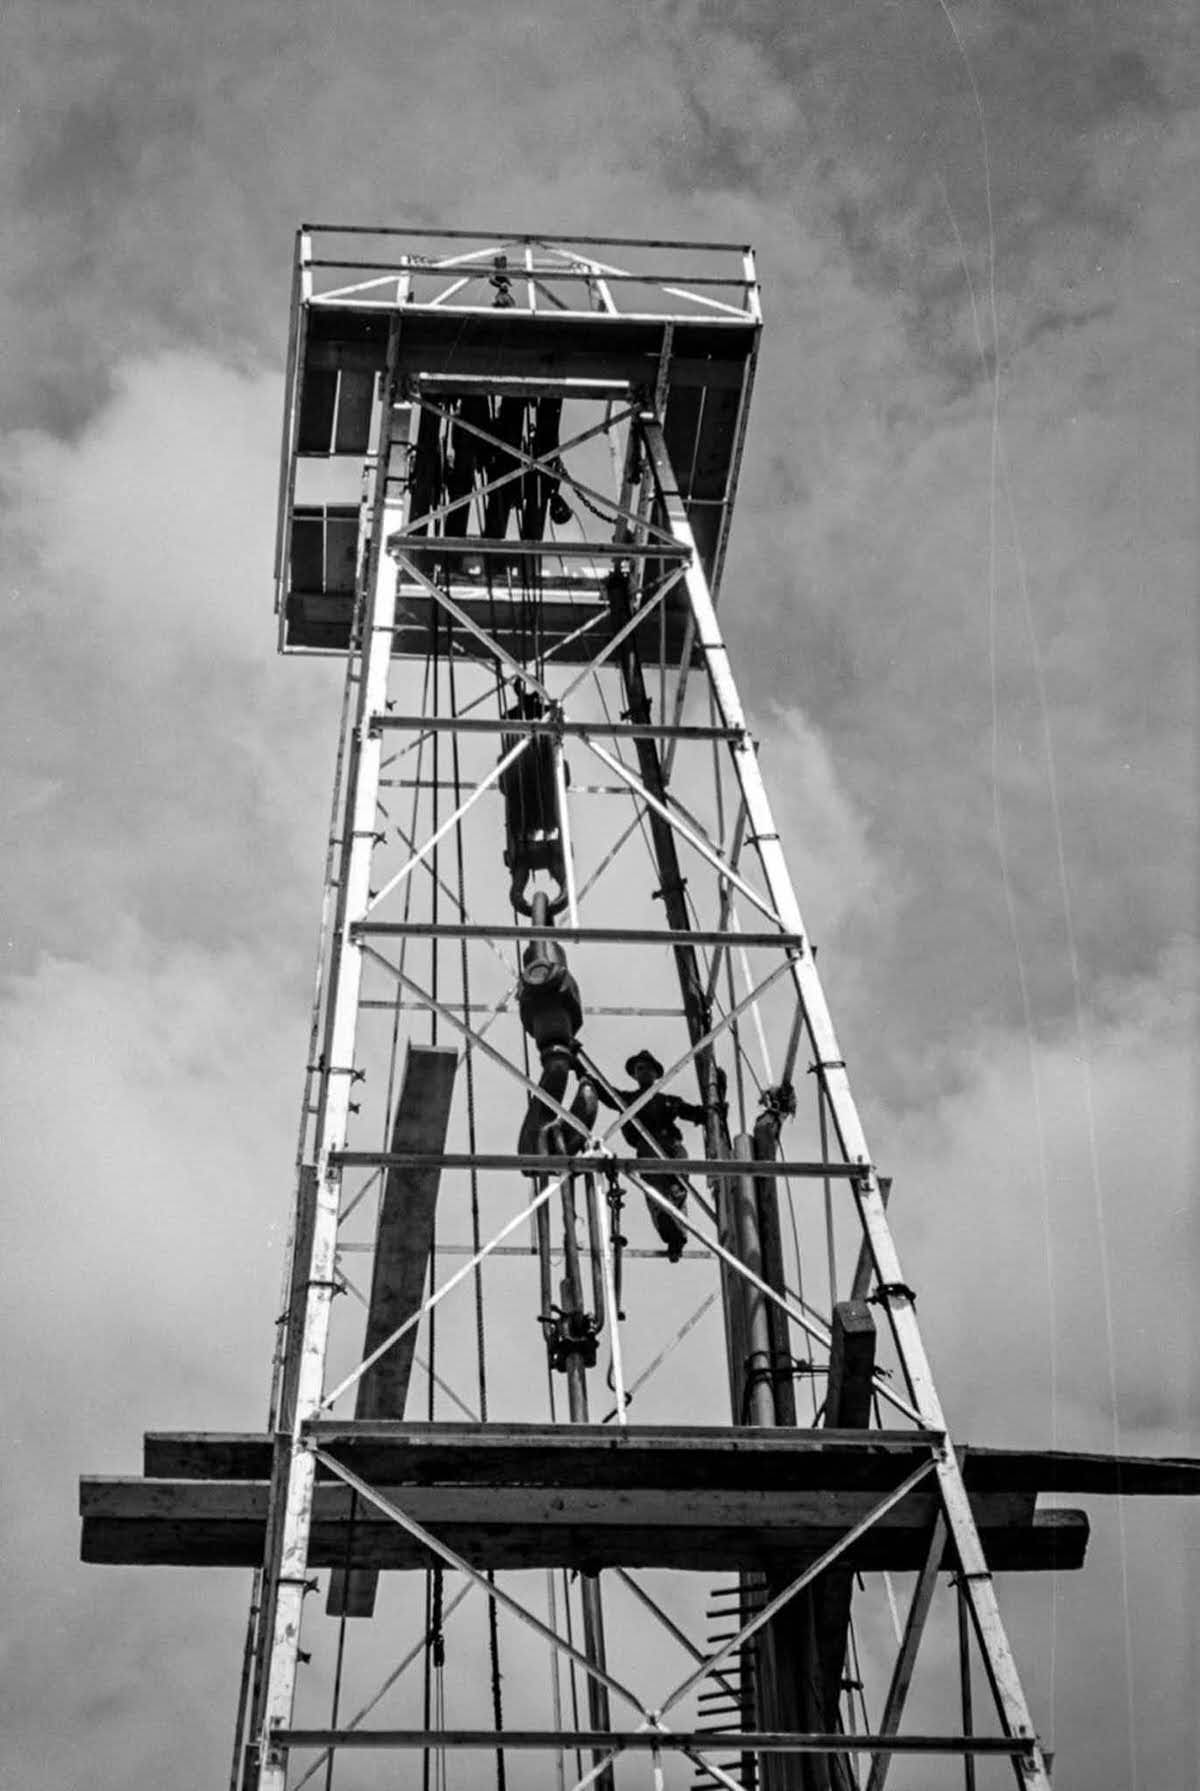 A worker holds onto the traveling block near the top of the derrick.